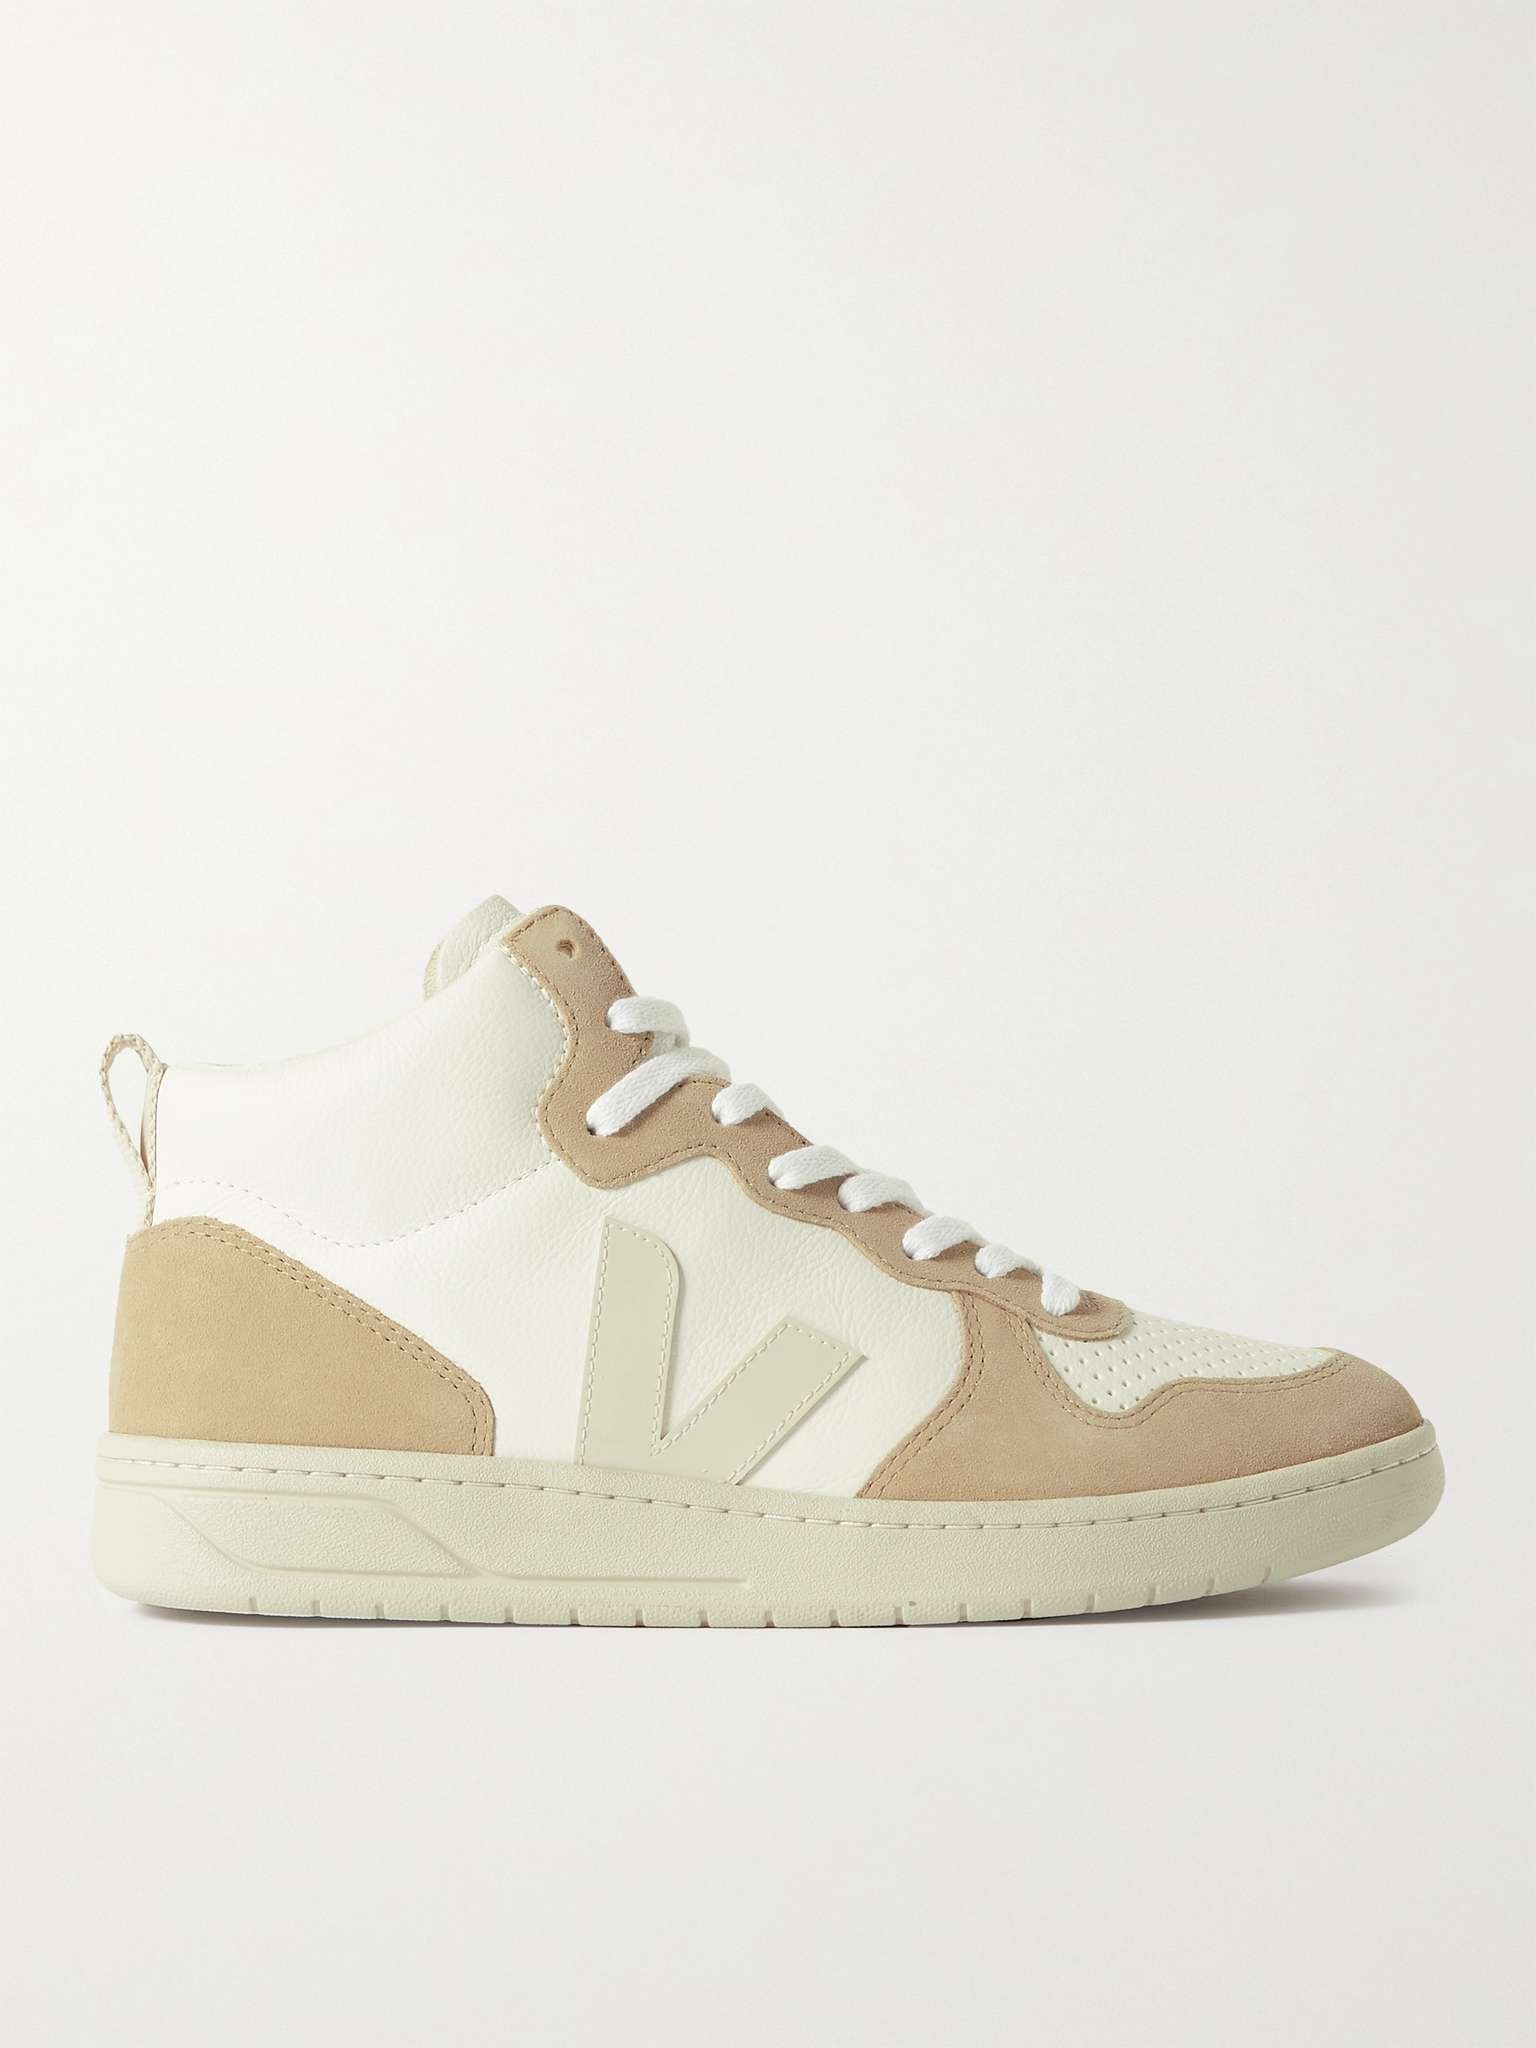 V-15 Suede-Trimmed Perforated Leather High-Top Sneakers - 1